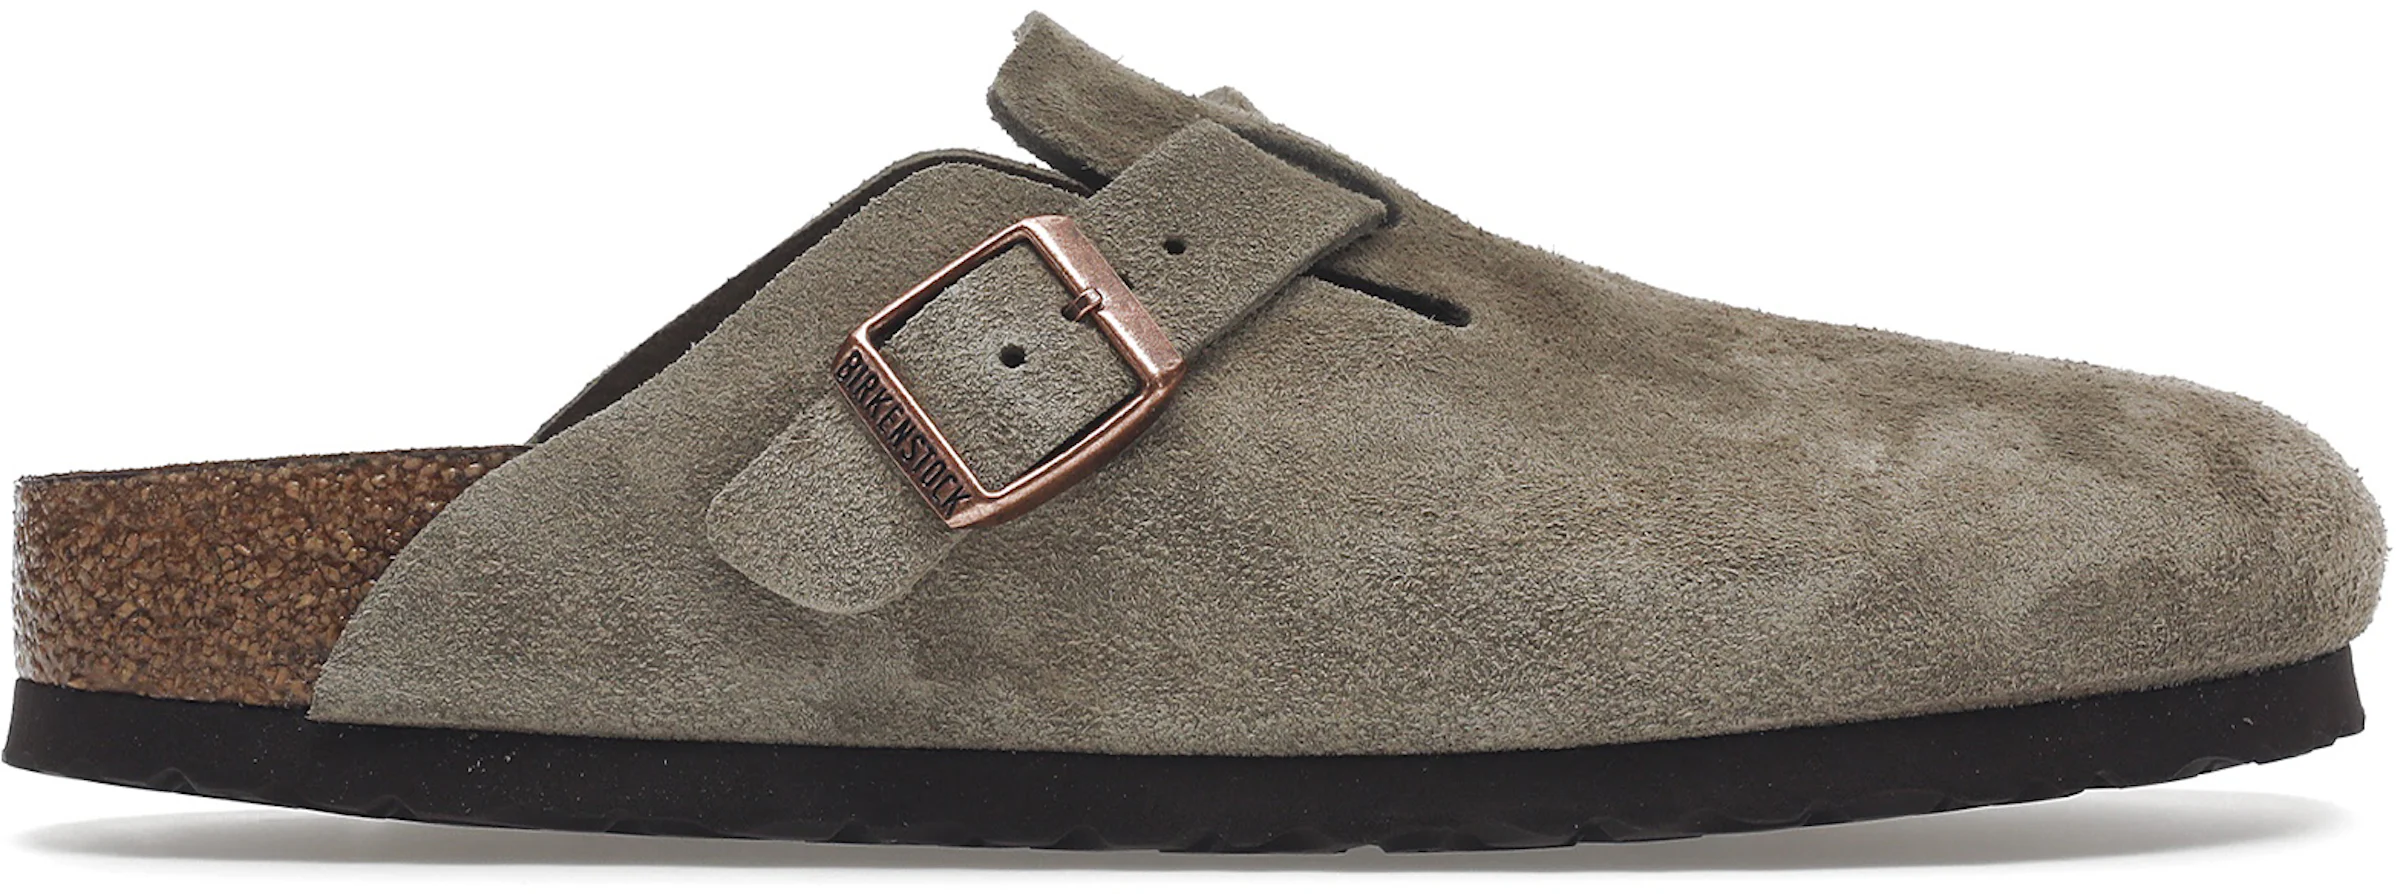 Birkenstock Boston Soft Footbed Suede Taupe (Narrow Fit) Men's - 0560773 -  US